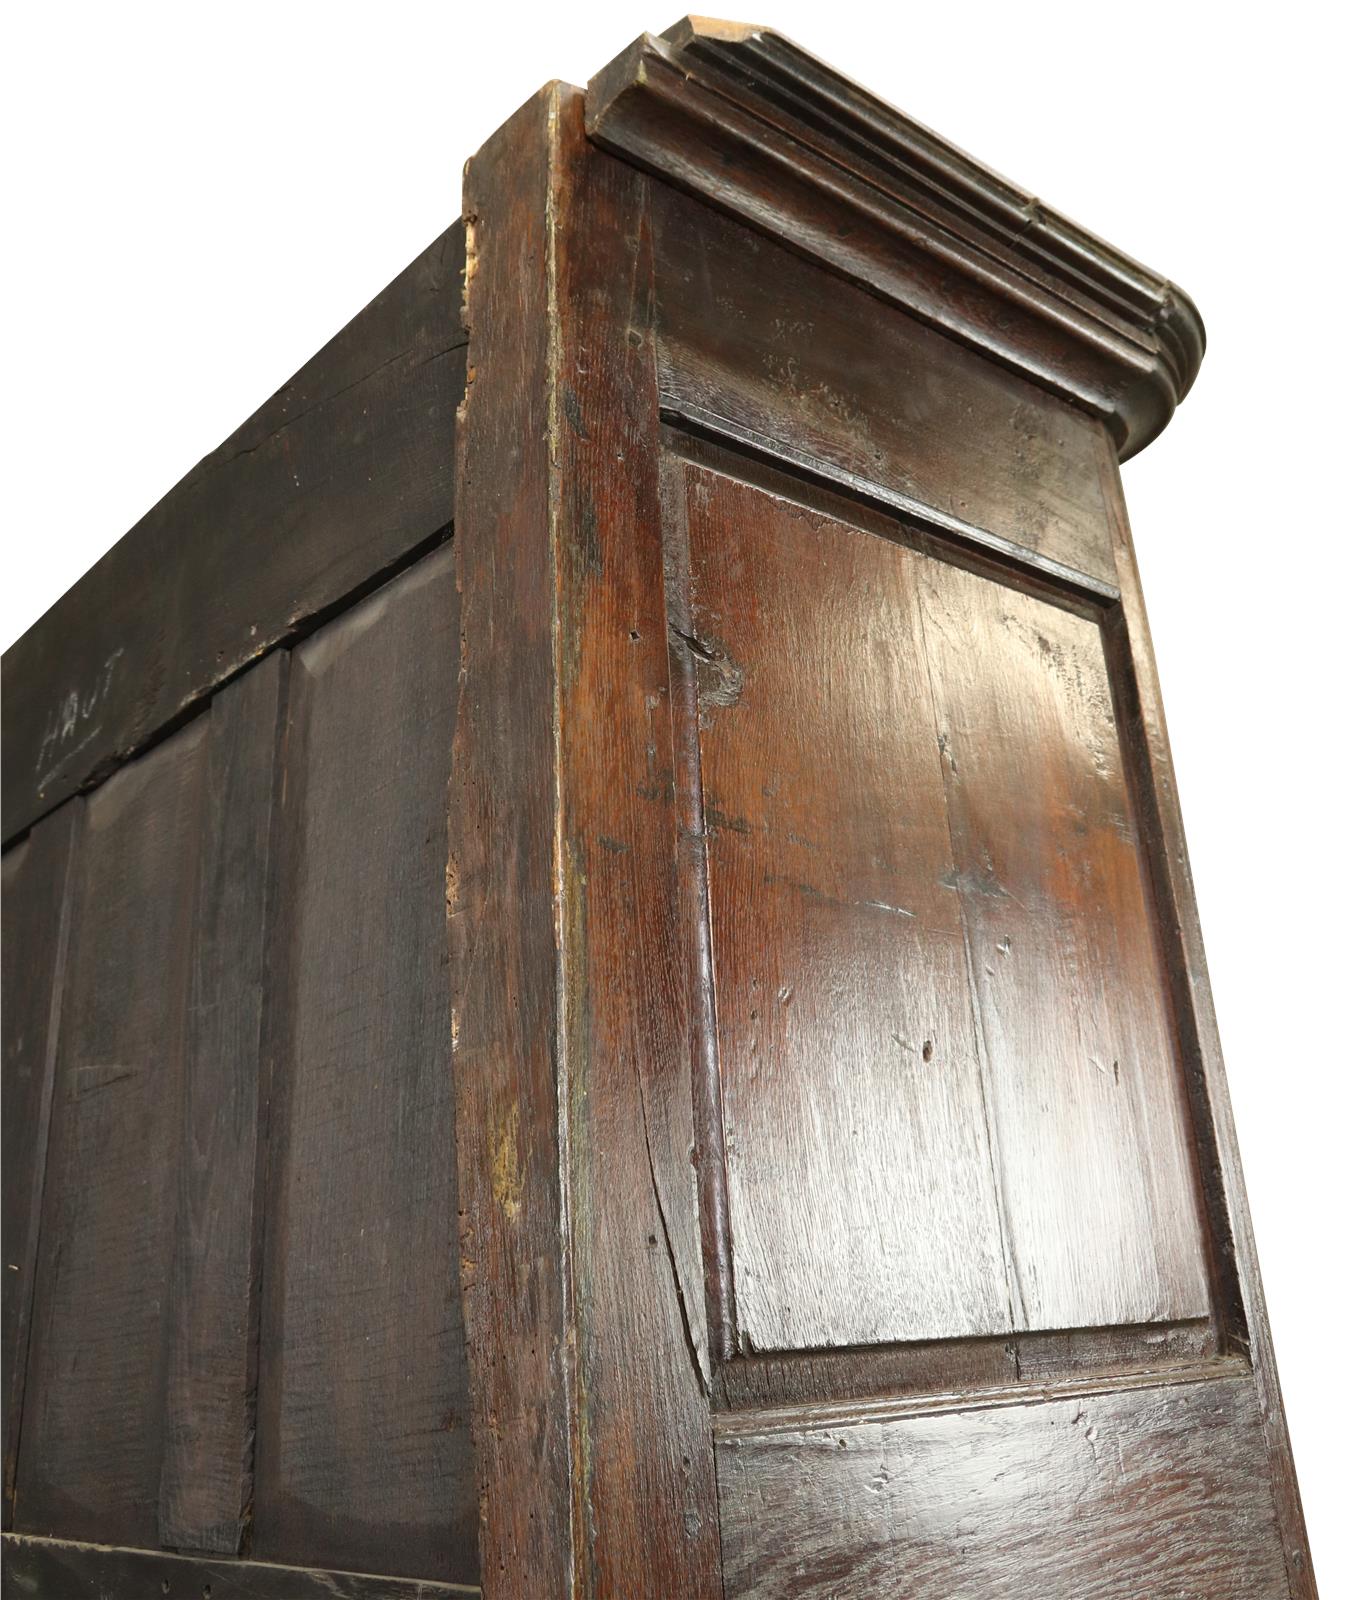 Armoire Antique French Provincial Very Old 1790 Oak Wood Peg Construction Heart -Image 12